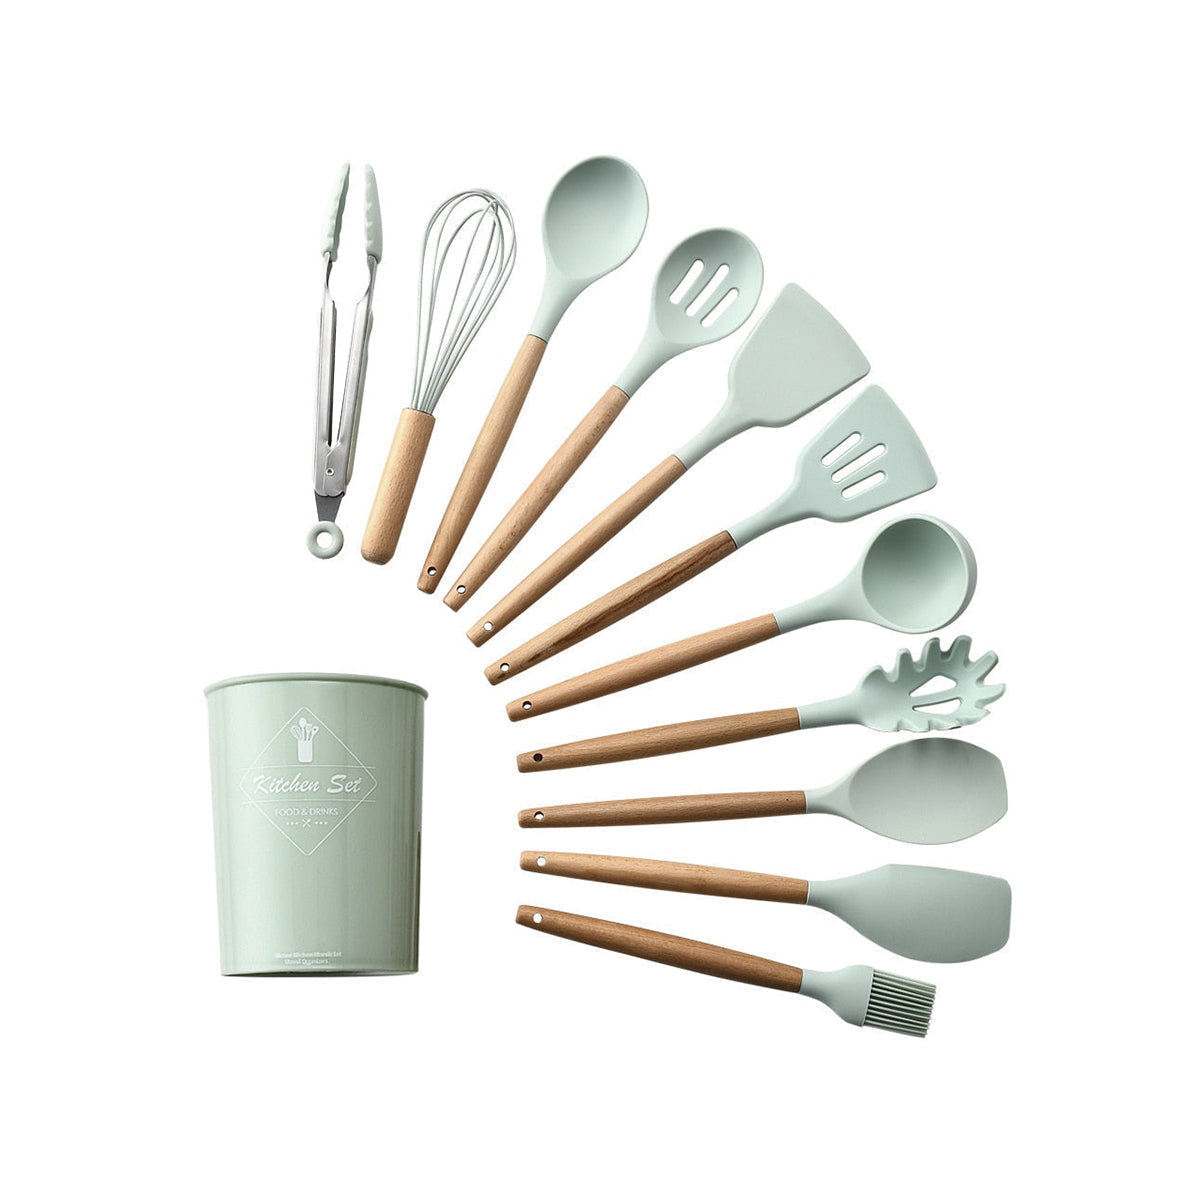 Silicone-Wood Cooking Tools